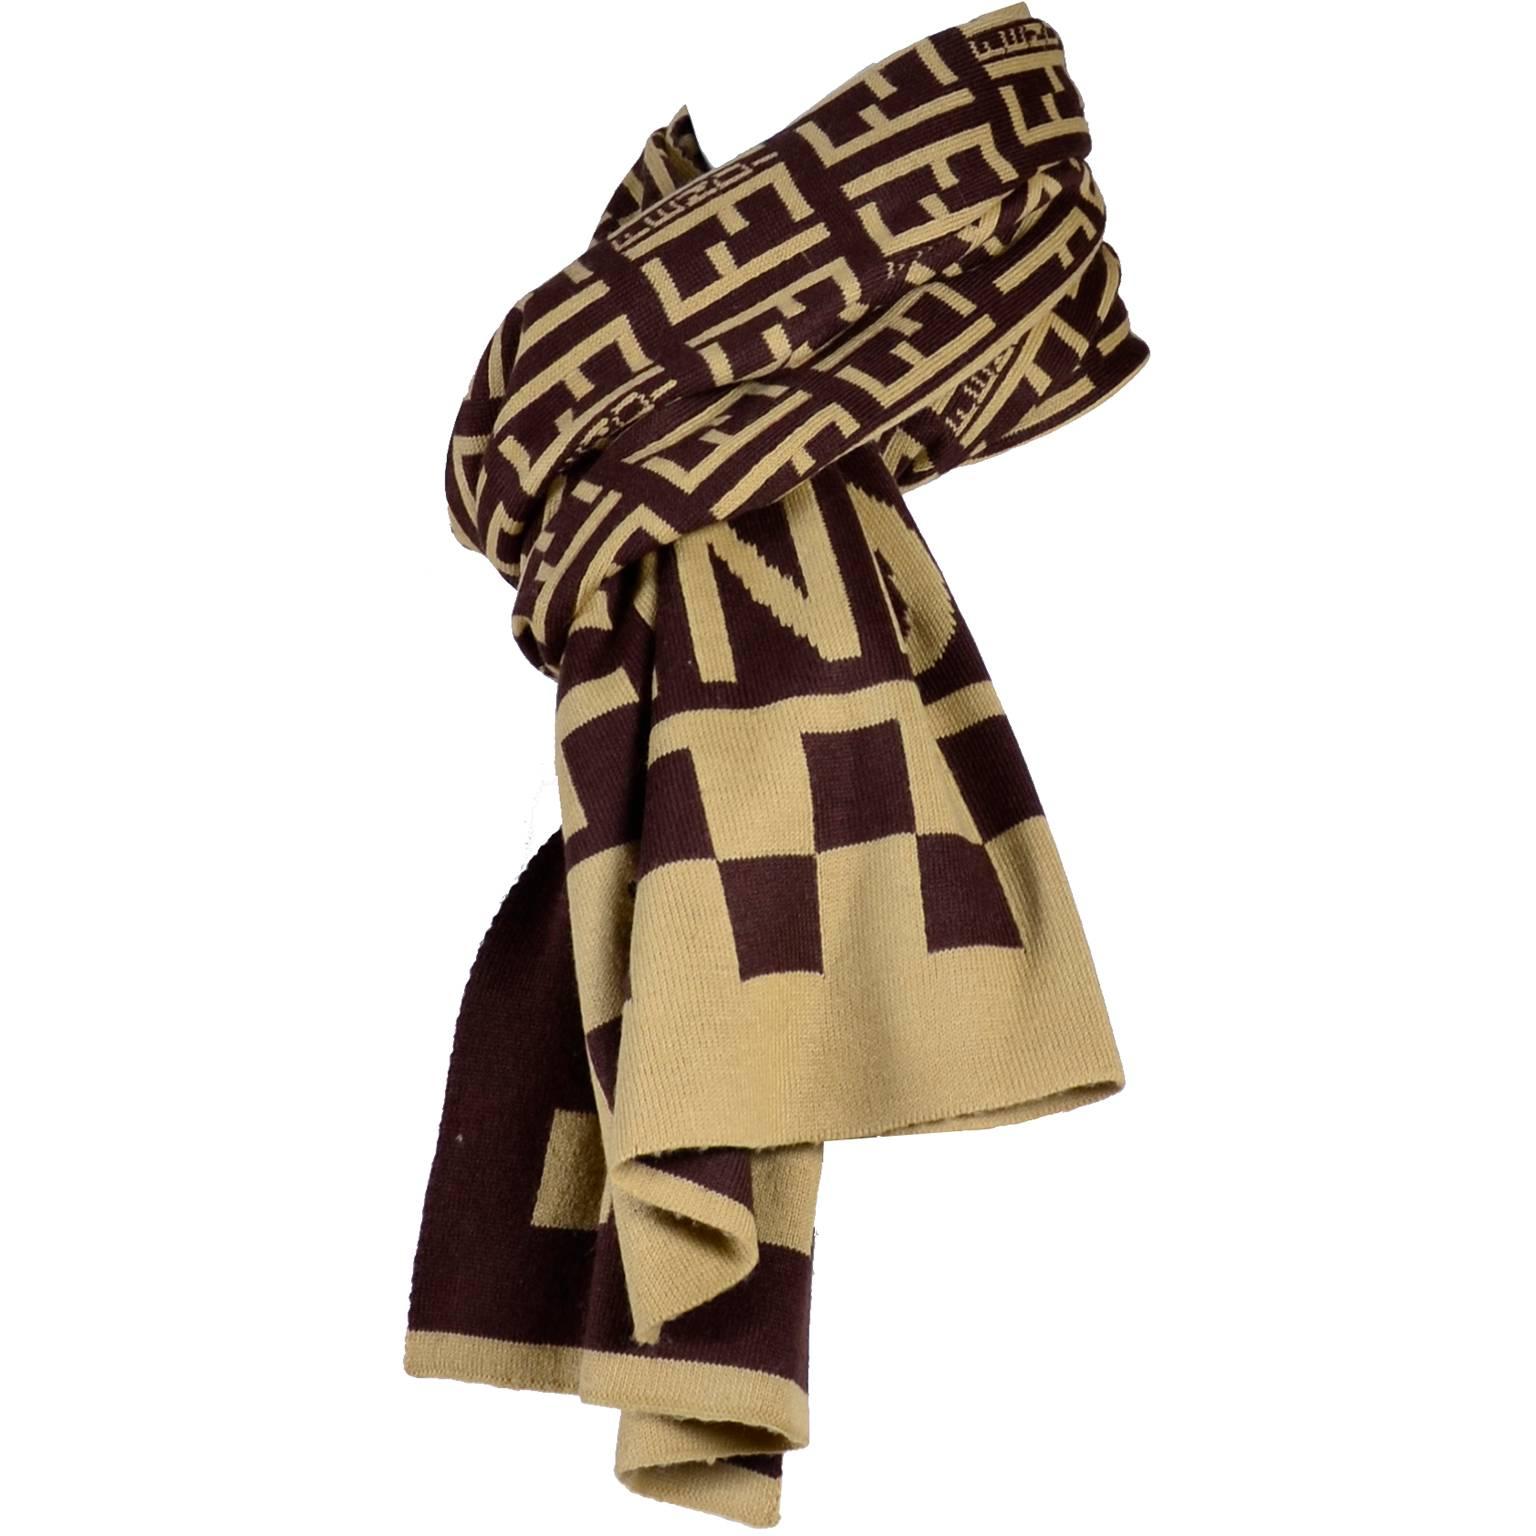 This is a great long vintage scarf from Fendi in brown and creamy beige with the Fendi logo and the word Fendi in the fabric.  The scarf measures 13 x 68” and is 70% cashmere and 30% wool. Made in Italy. 